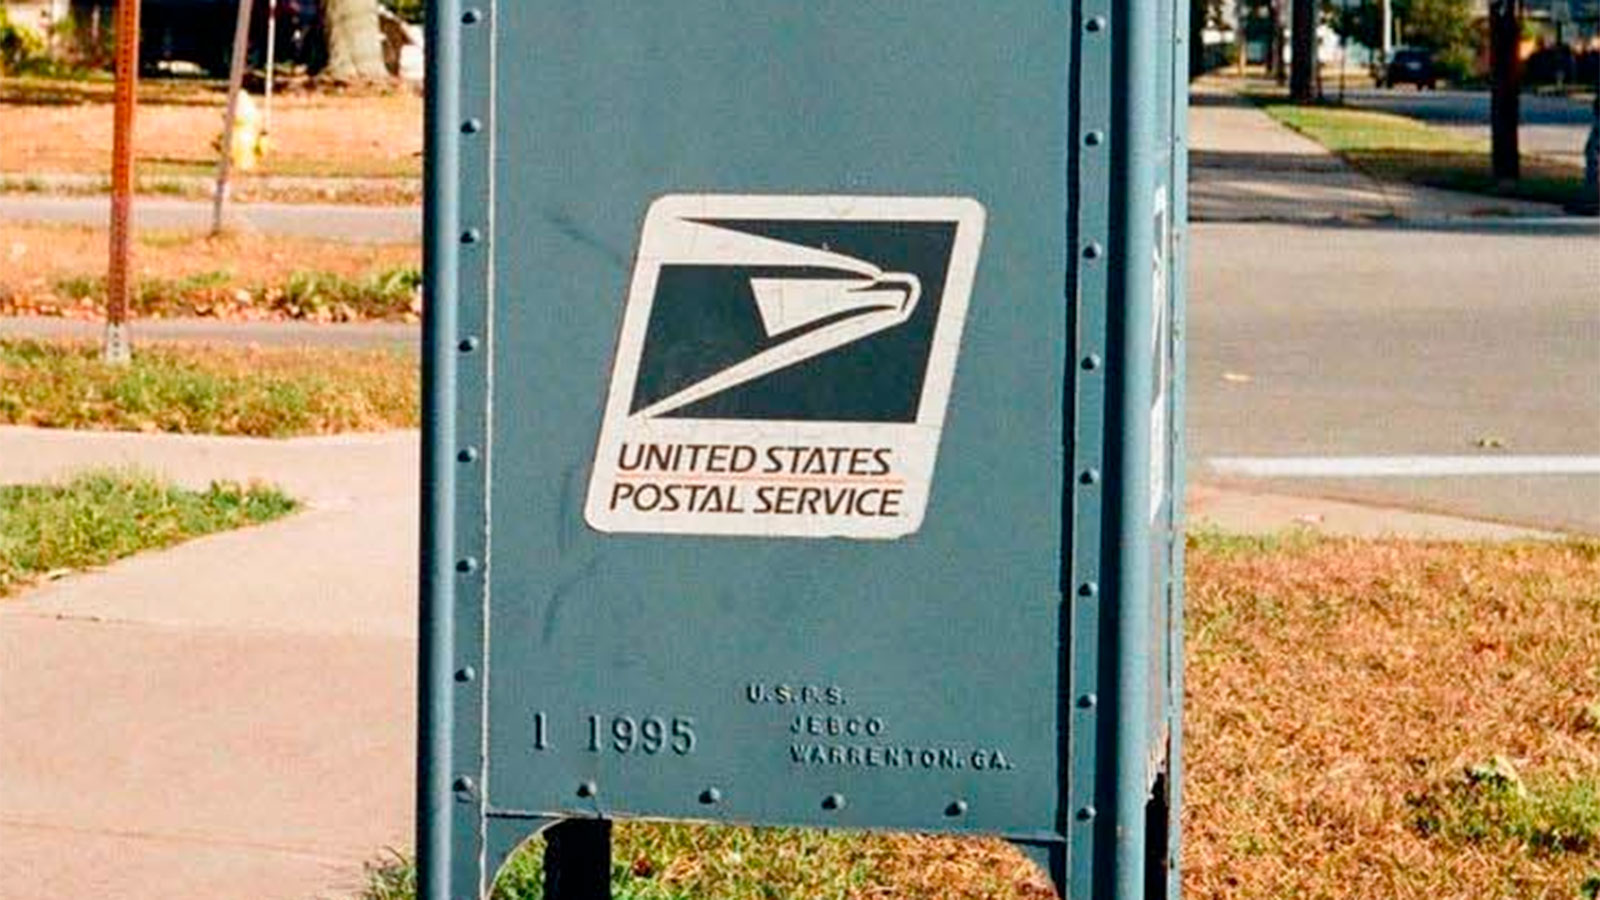 The U.S. Postal Service signaled plans Tuesday for a rate increase that includes hiking the cost of...